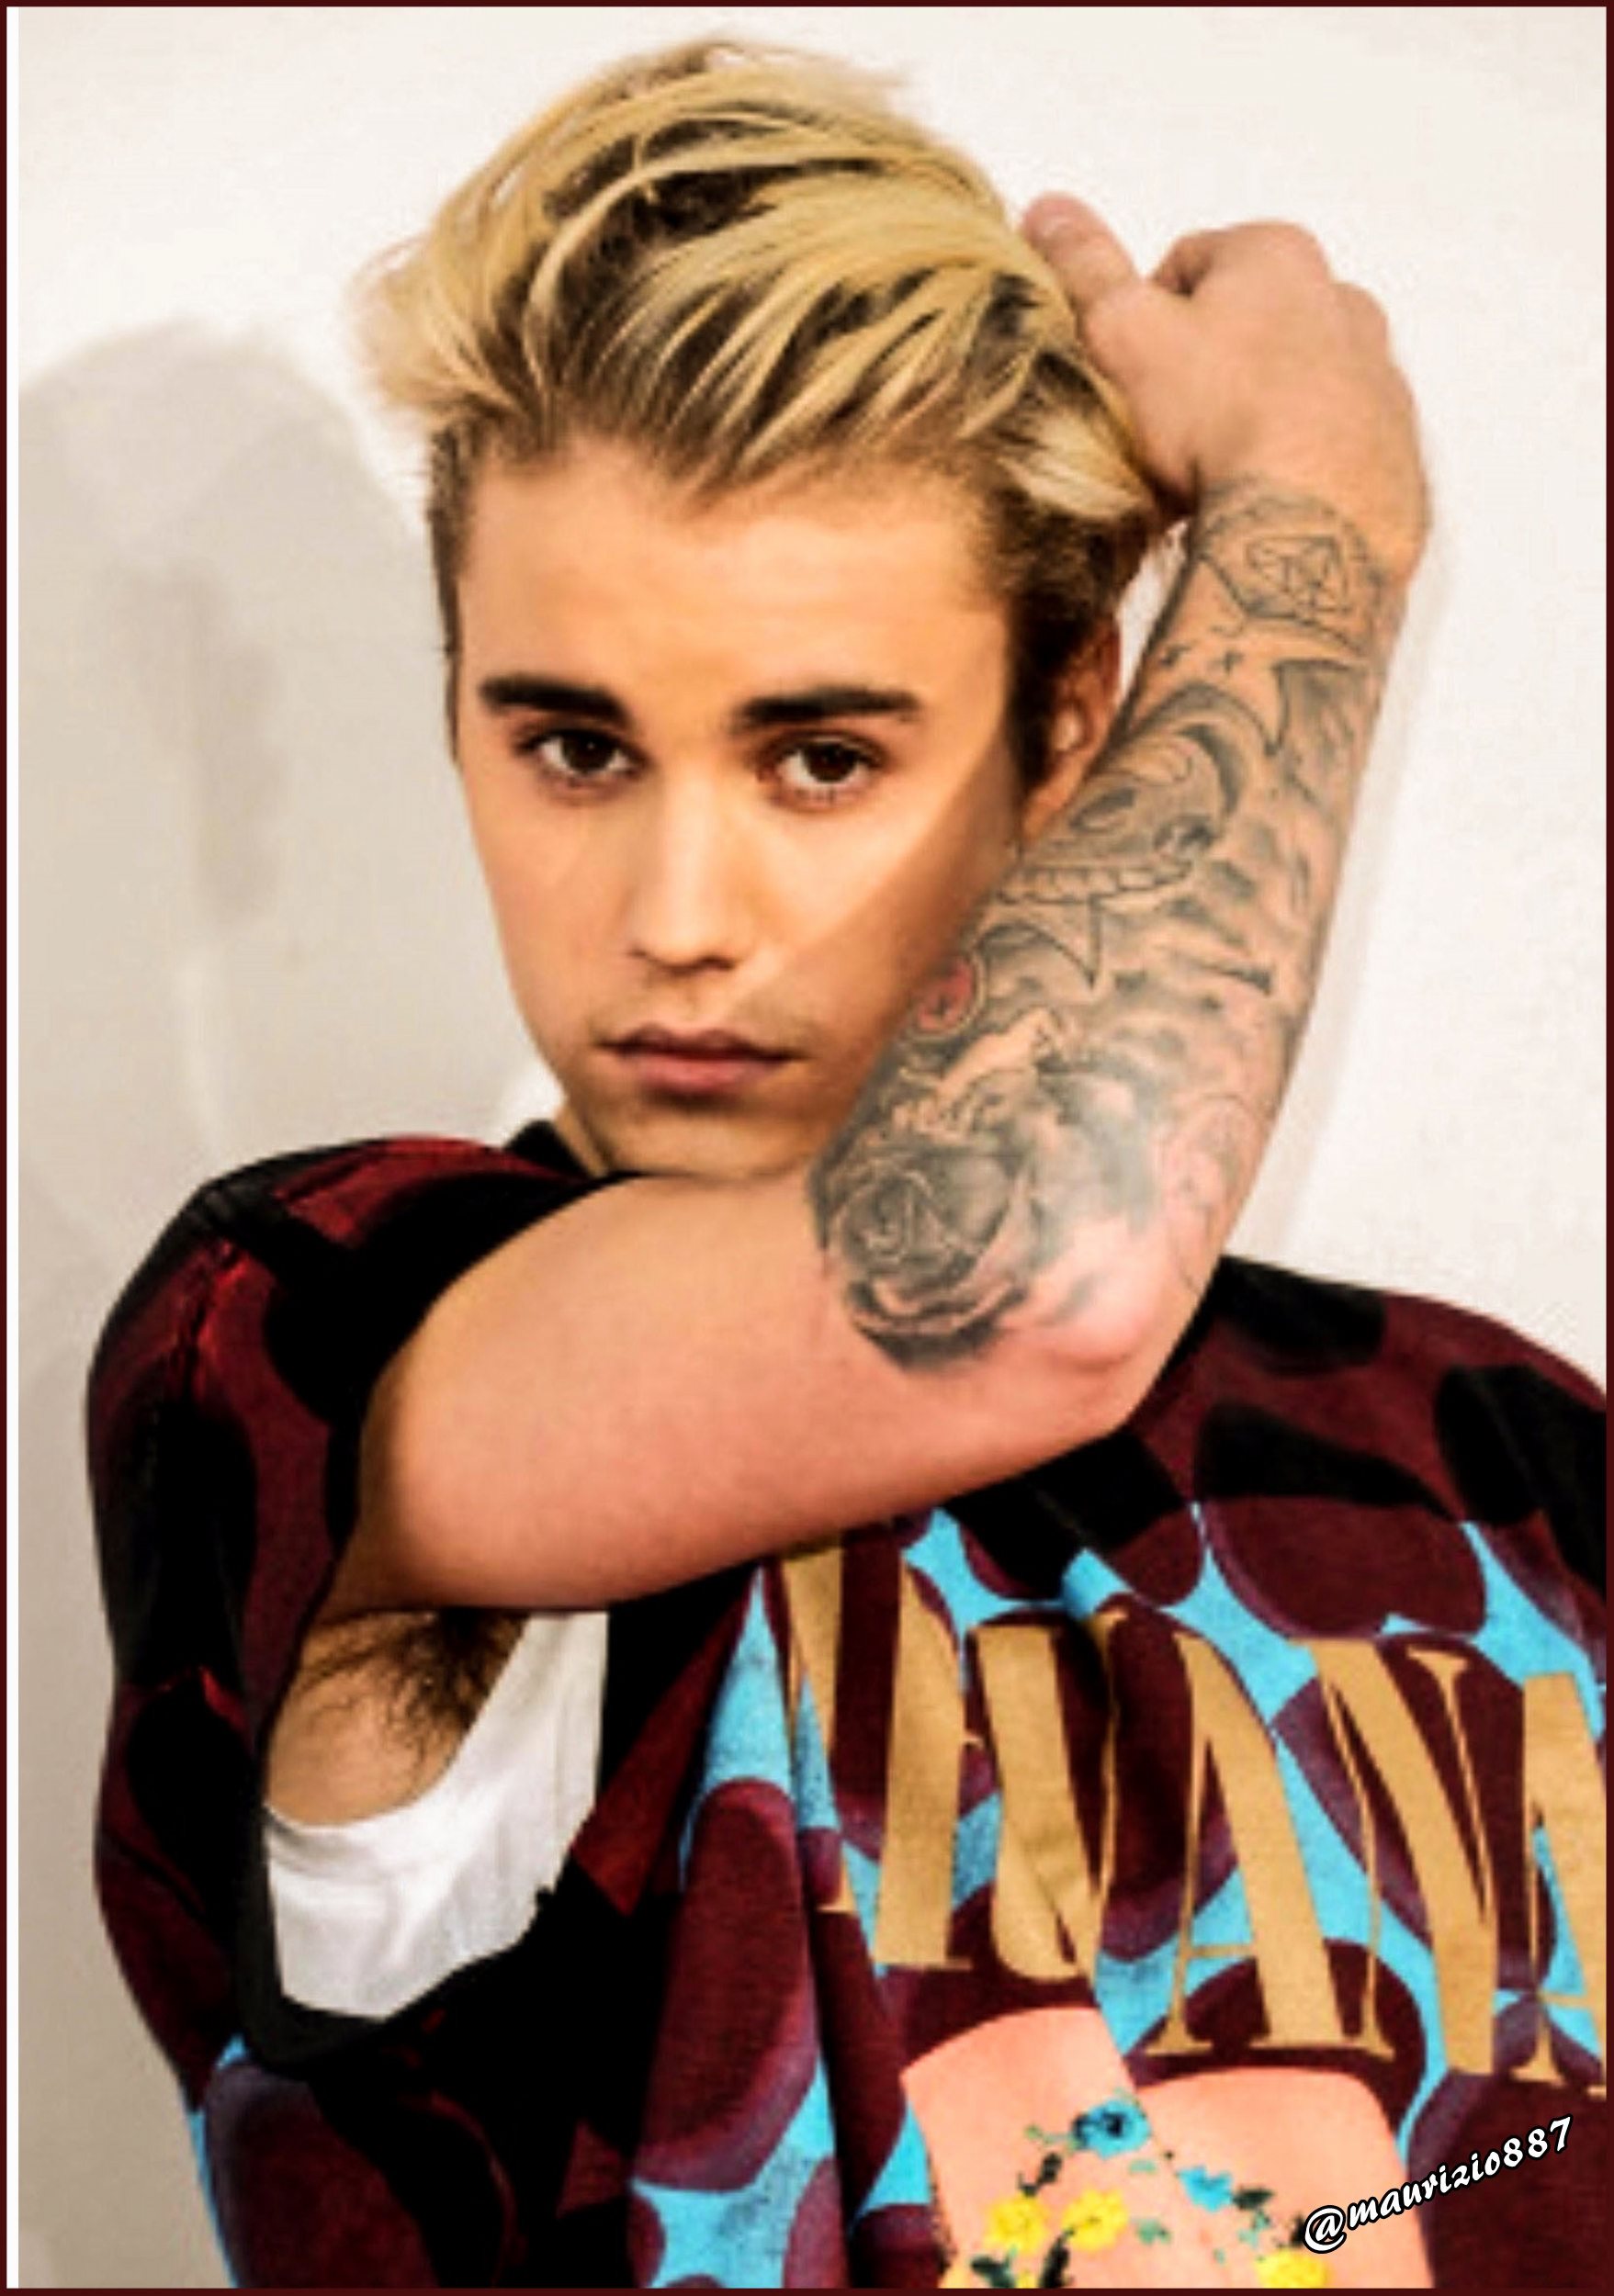 Justin bieber new songs free download 2015